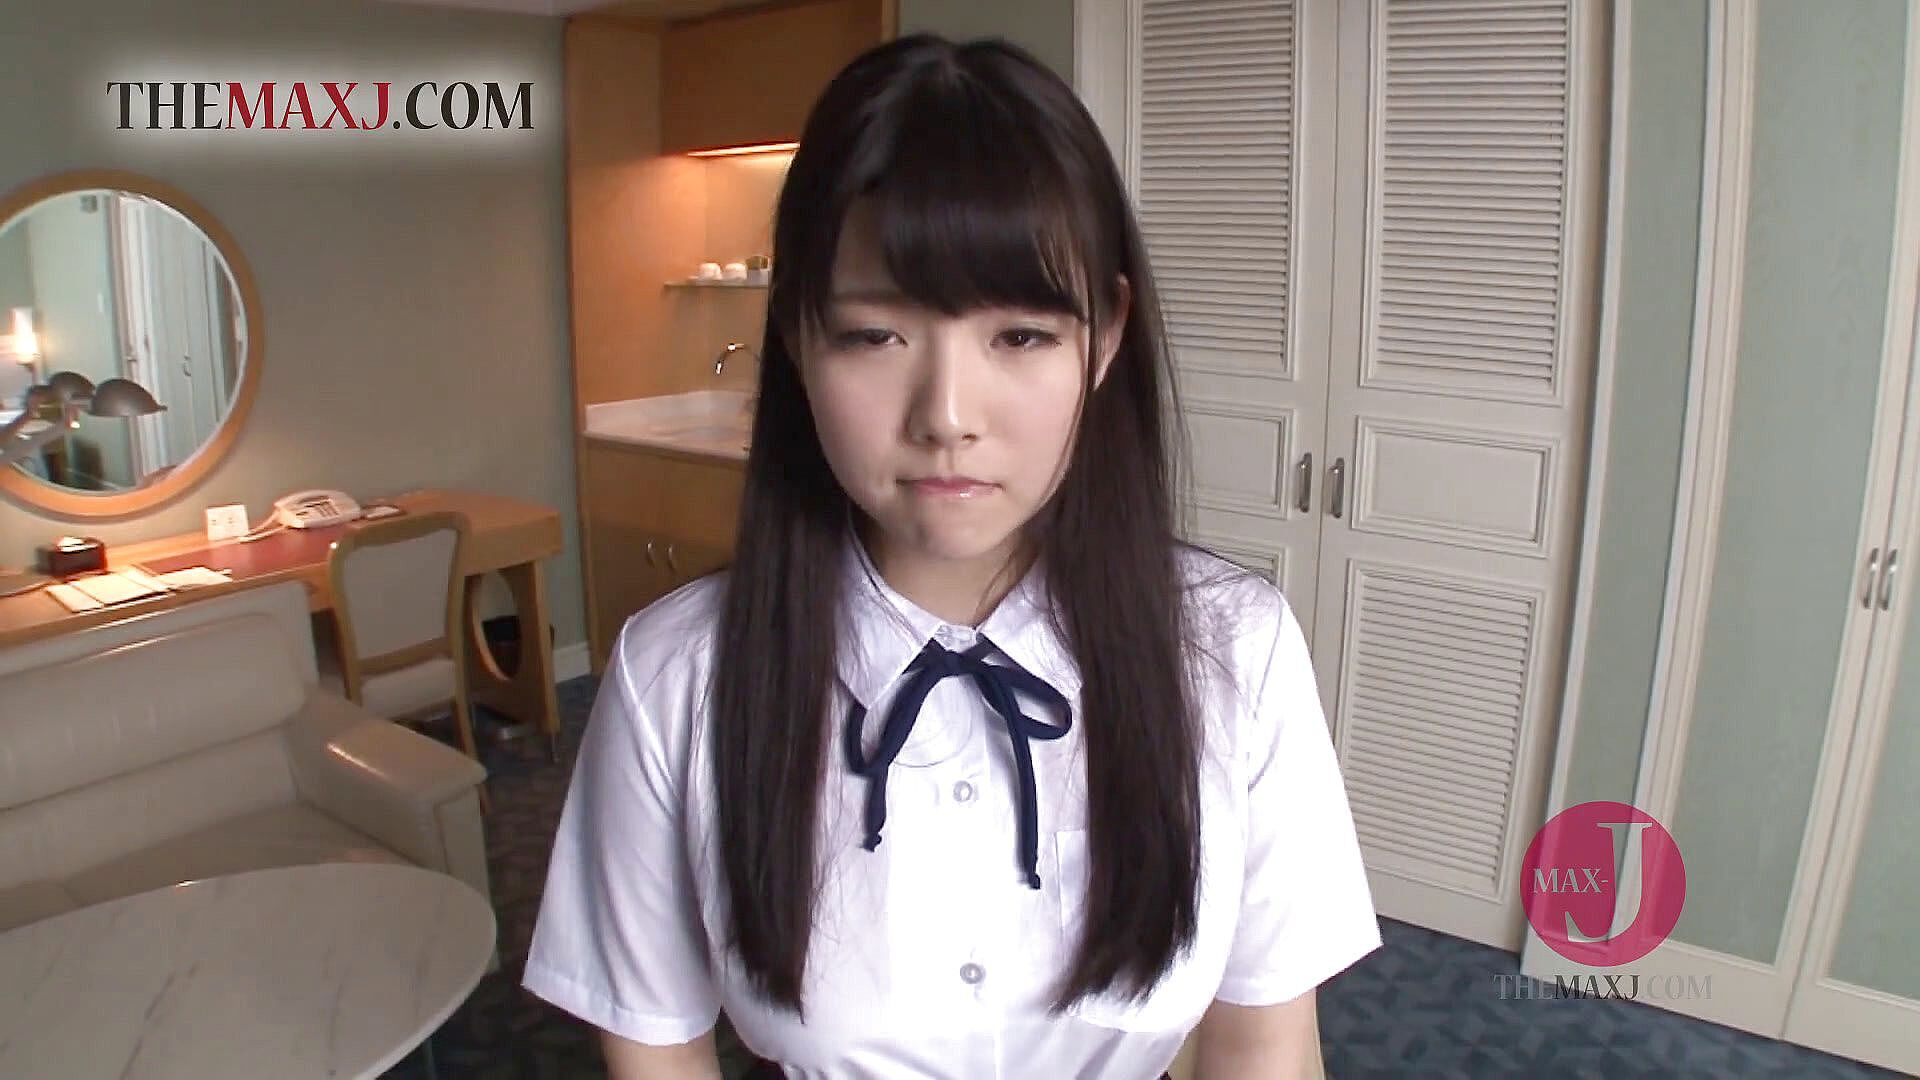 Adorable Japanese college girl gets her muff vibrated –  – porn studio: Asian happy ending